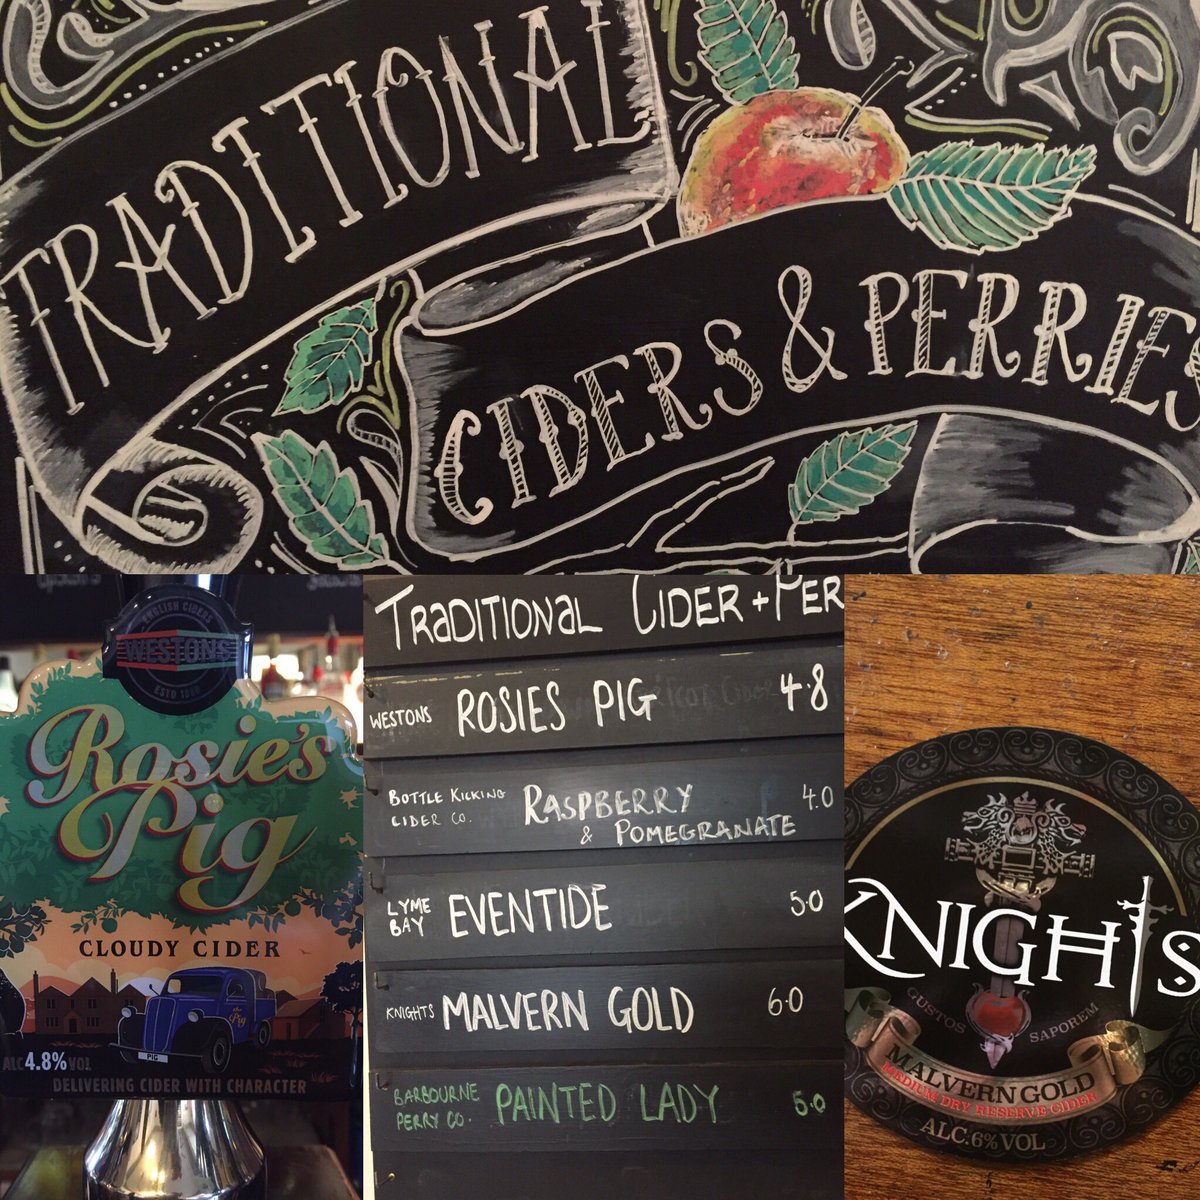 It's #sarurday! So come and join us for a #traditionalcider! @WestonsCiderMil @TheBKCC @LymeBayWineLtd @CiderGuruCRB